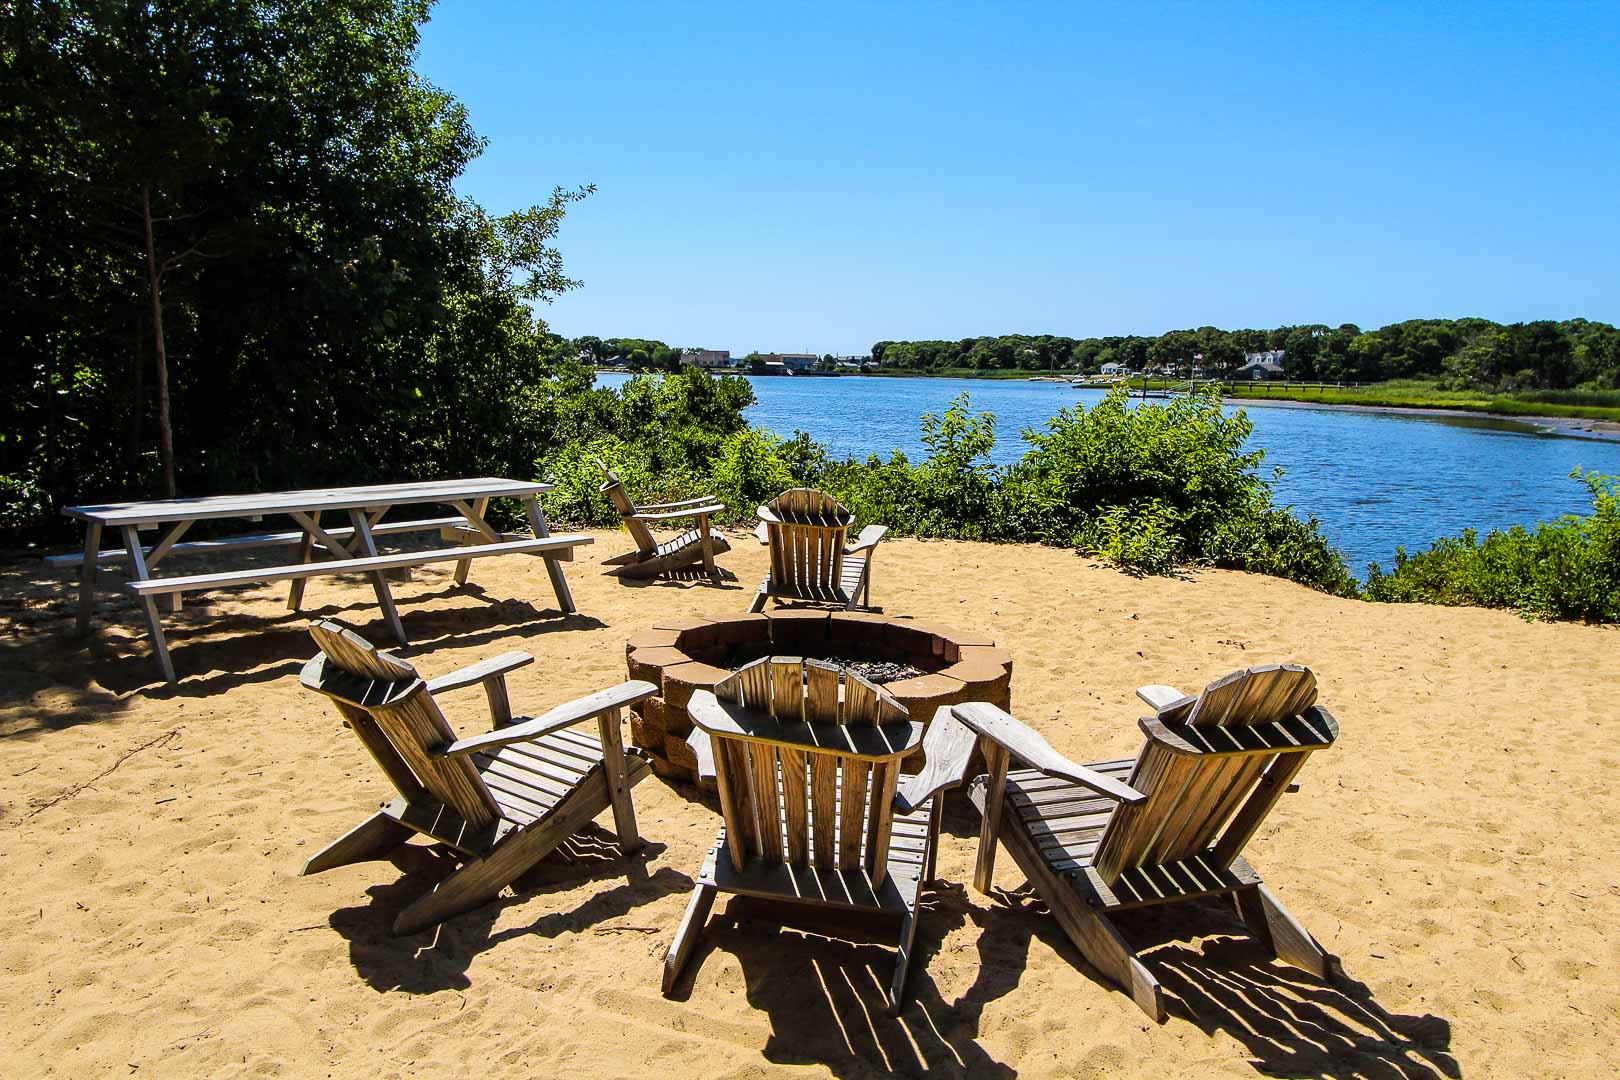 Clear skies and a a refreshing view at VRI's The Cove at Yarmouth in Massachusetts.